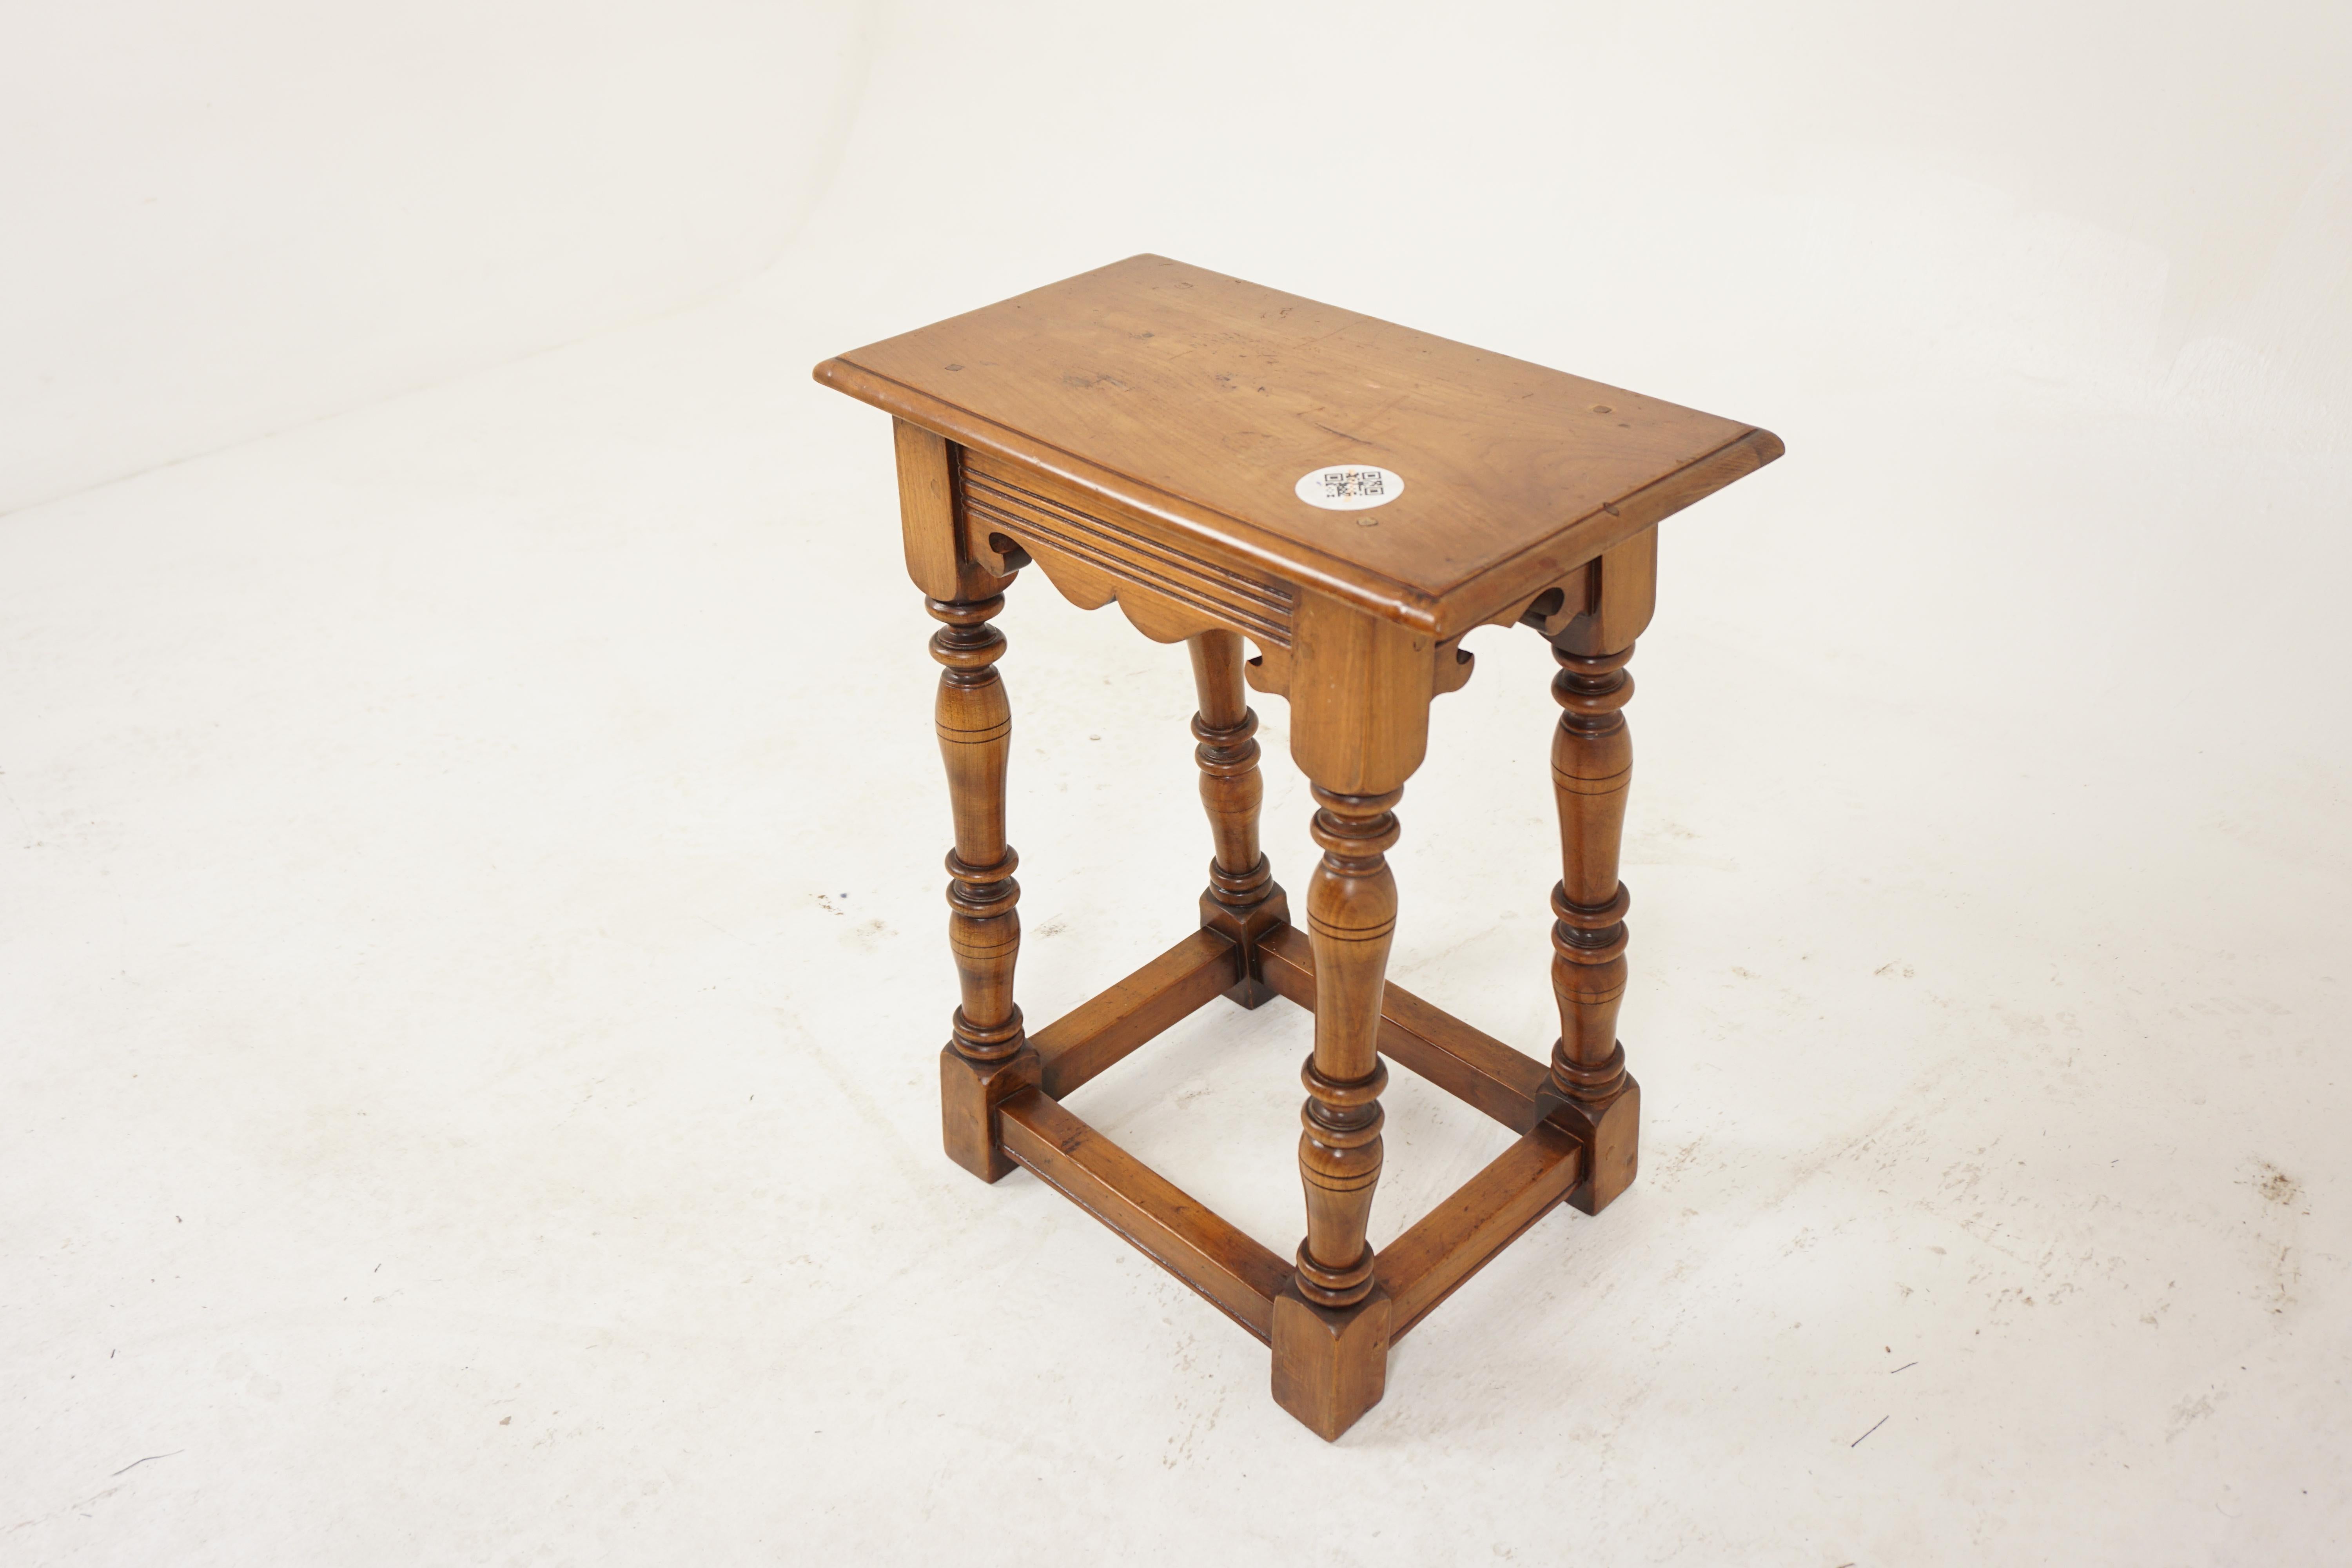 Vintage Georgian style elm stool, Scotland 1930, H065

Scotland 1930
Solid Elm
Original Finish

Rectangular moulded top
Carved skirt underneath
All standing on 4 turned legs
With stretcher base
Nice quality and solid joints
Good condition

Measures: